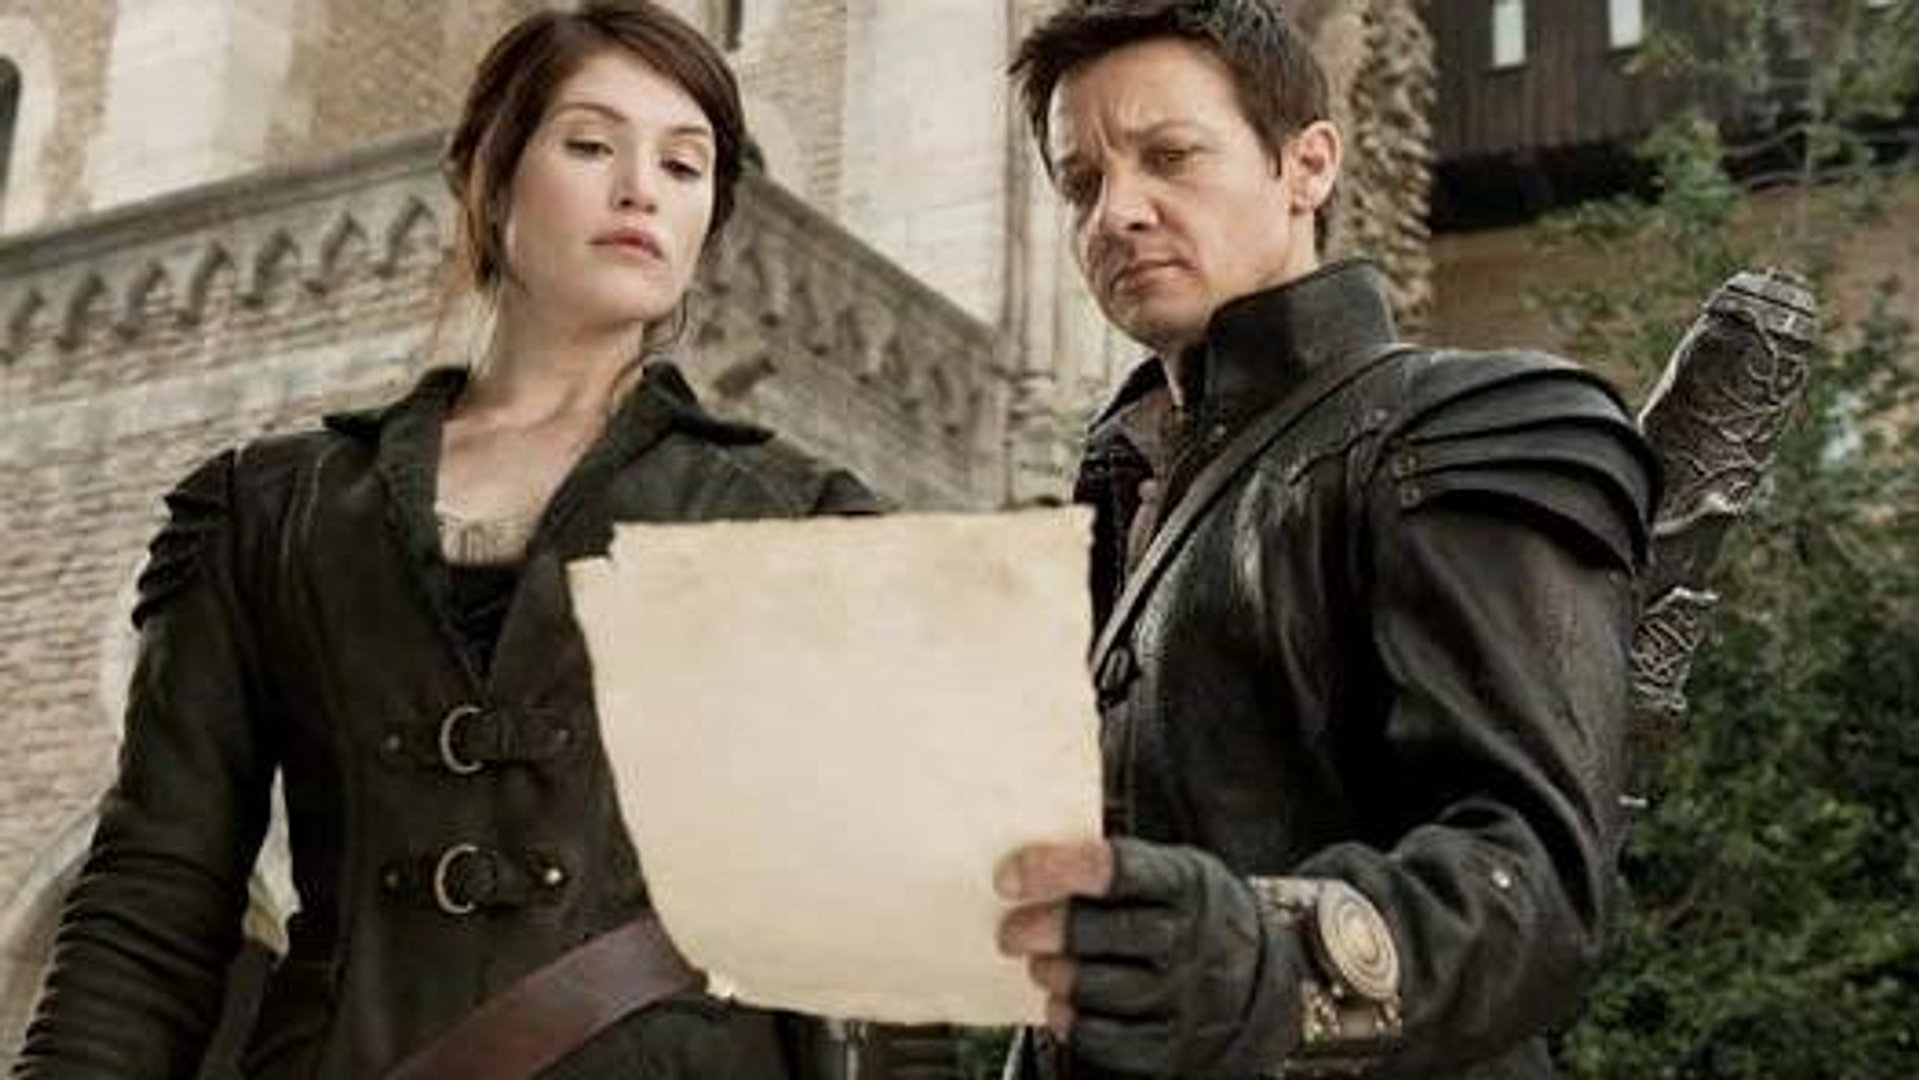 Hansel and Gretel - Witch Hunters